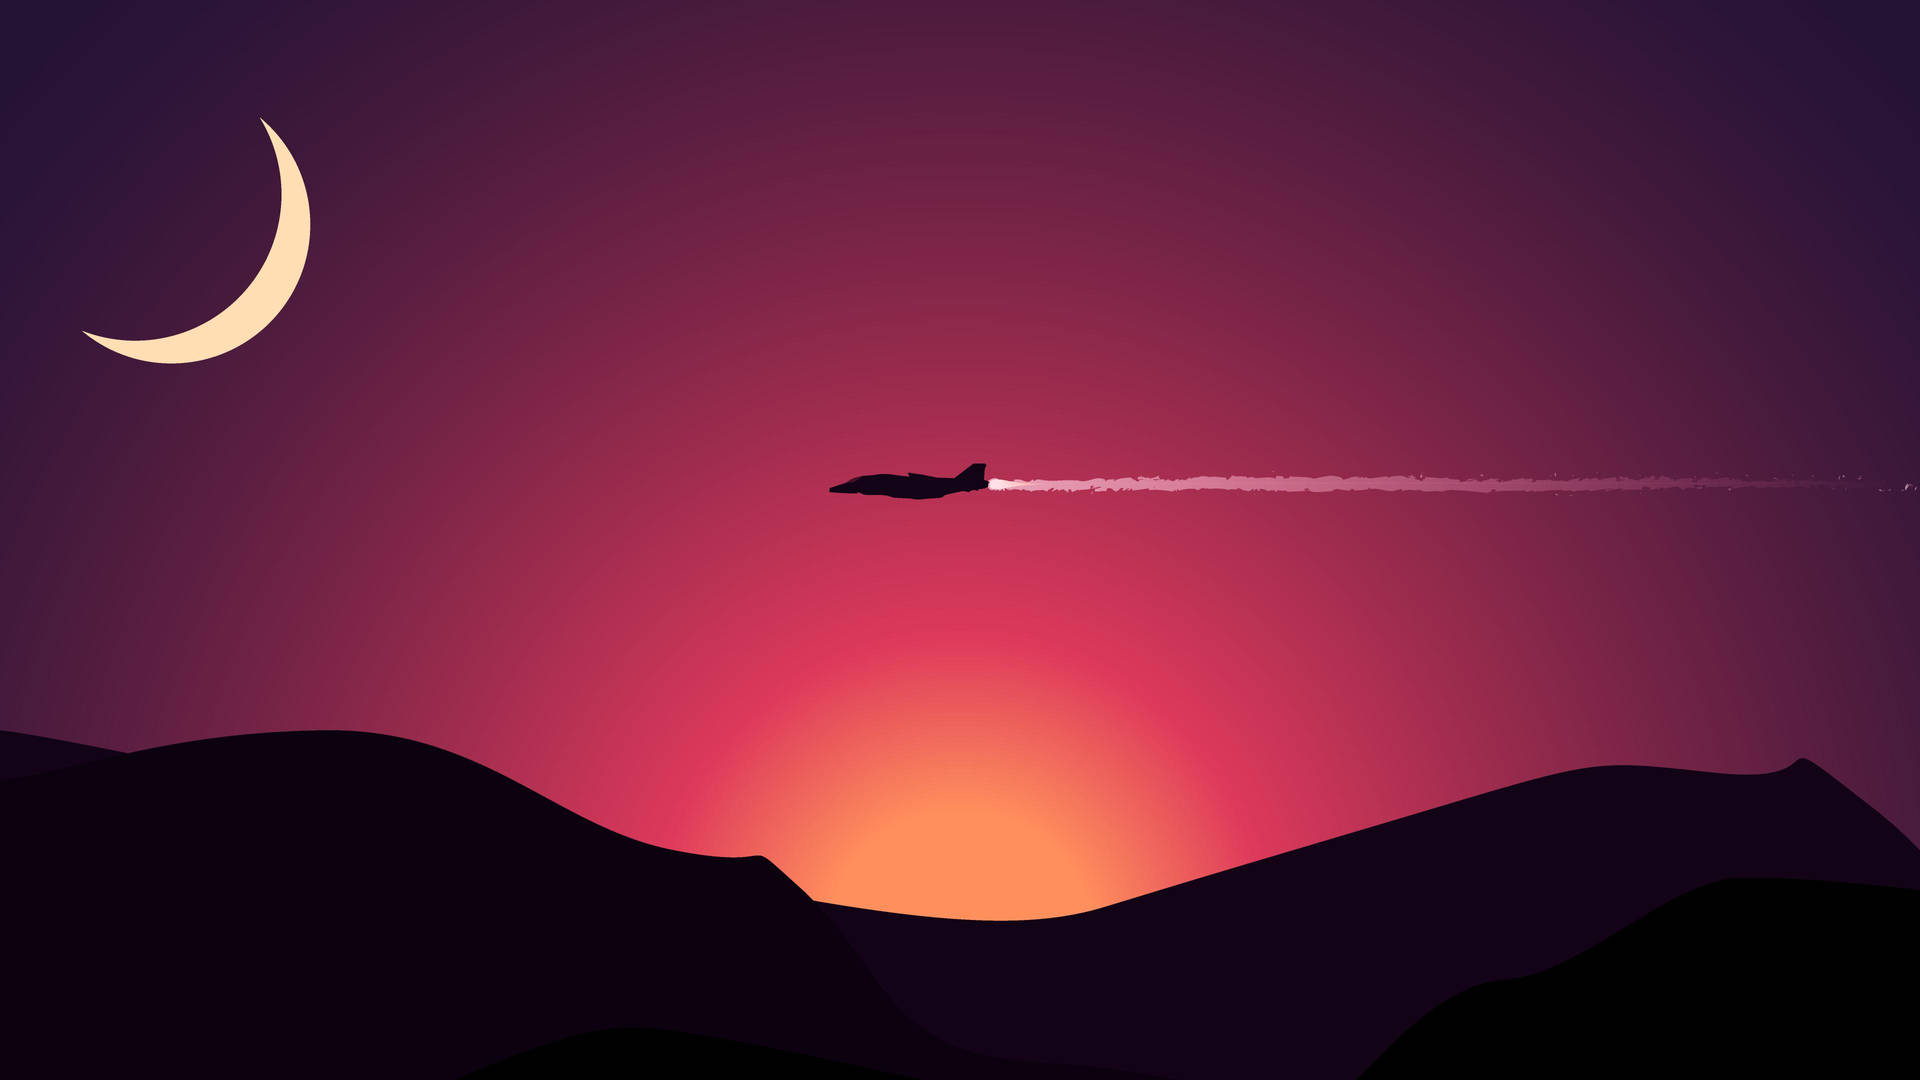 Enjoy the beauty of a plane's silhouette against a peaceful sunset. Wallpaper